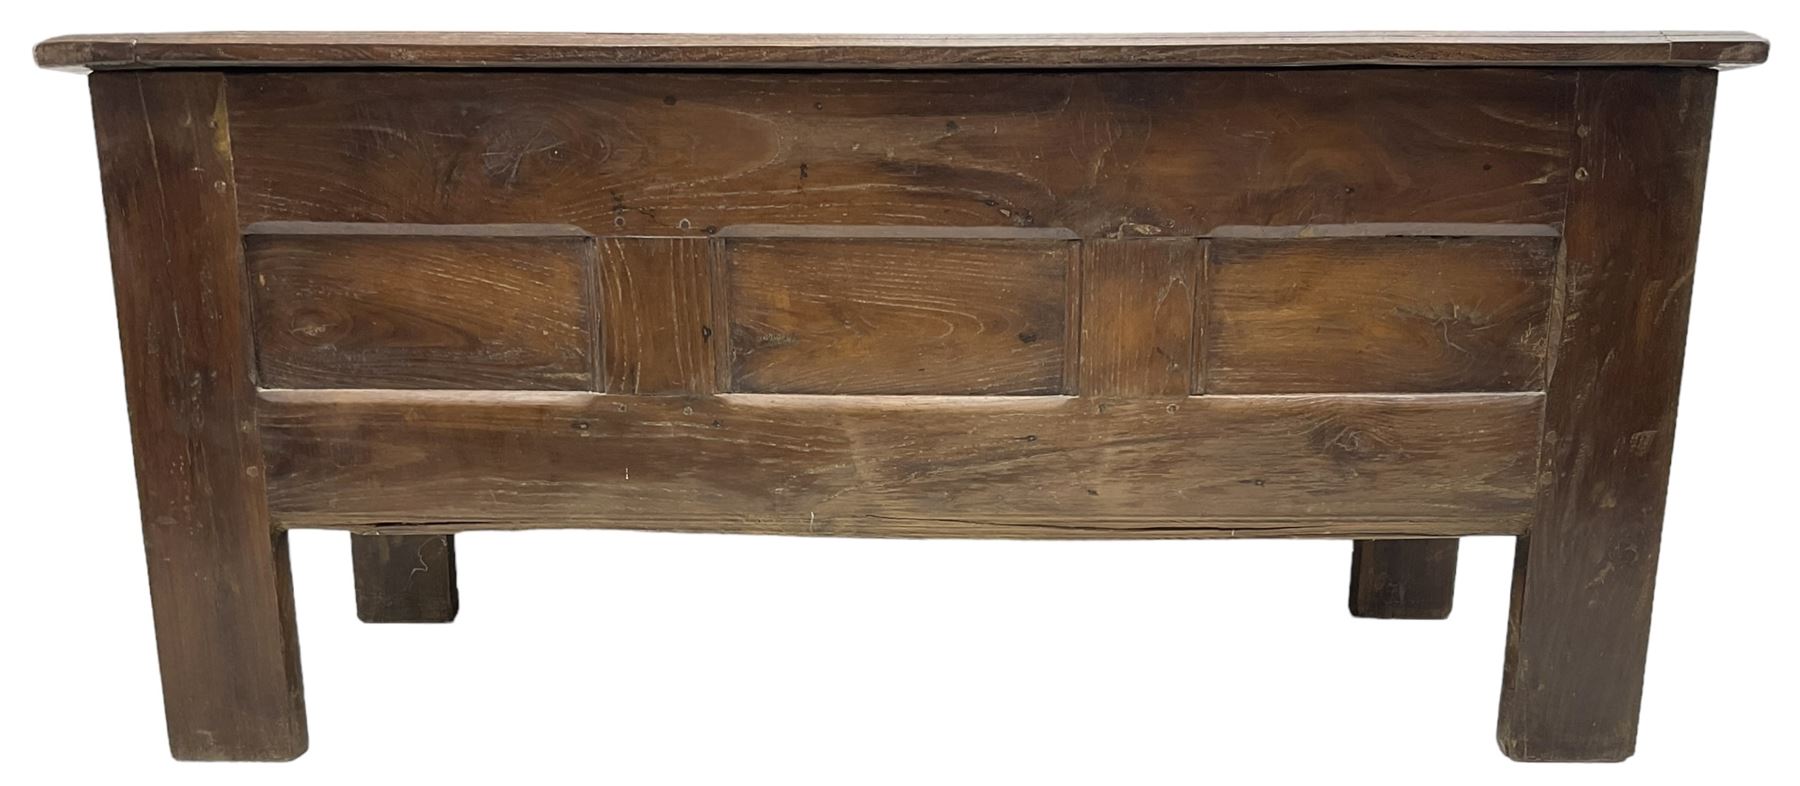 Large 18th century oak coffer or chest - Image 2 of 9